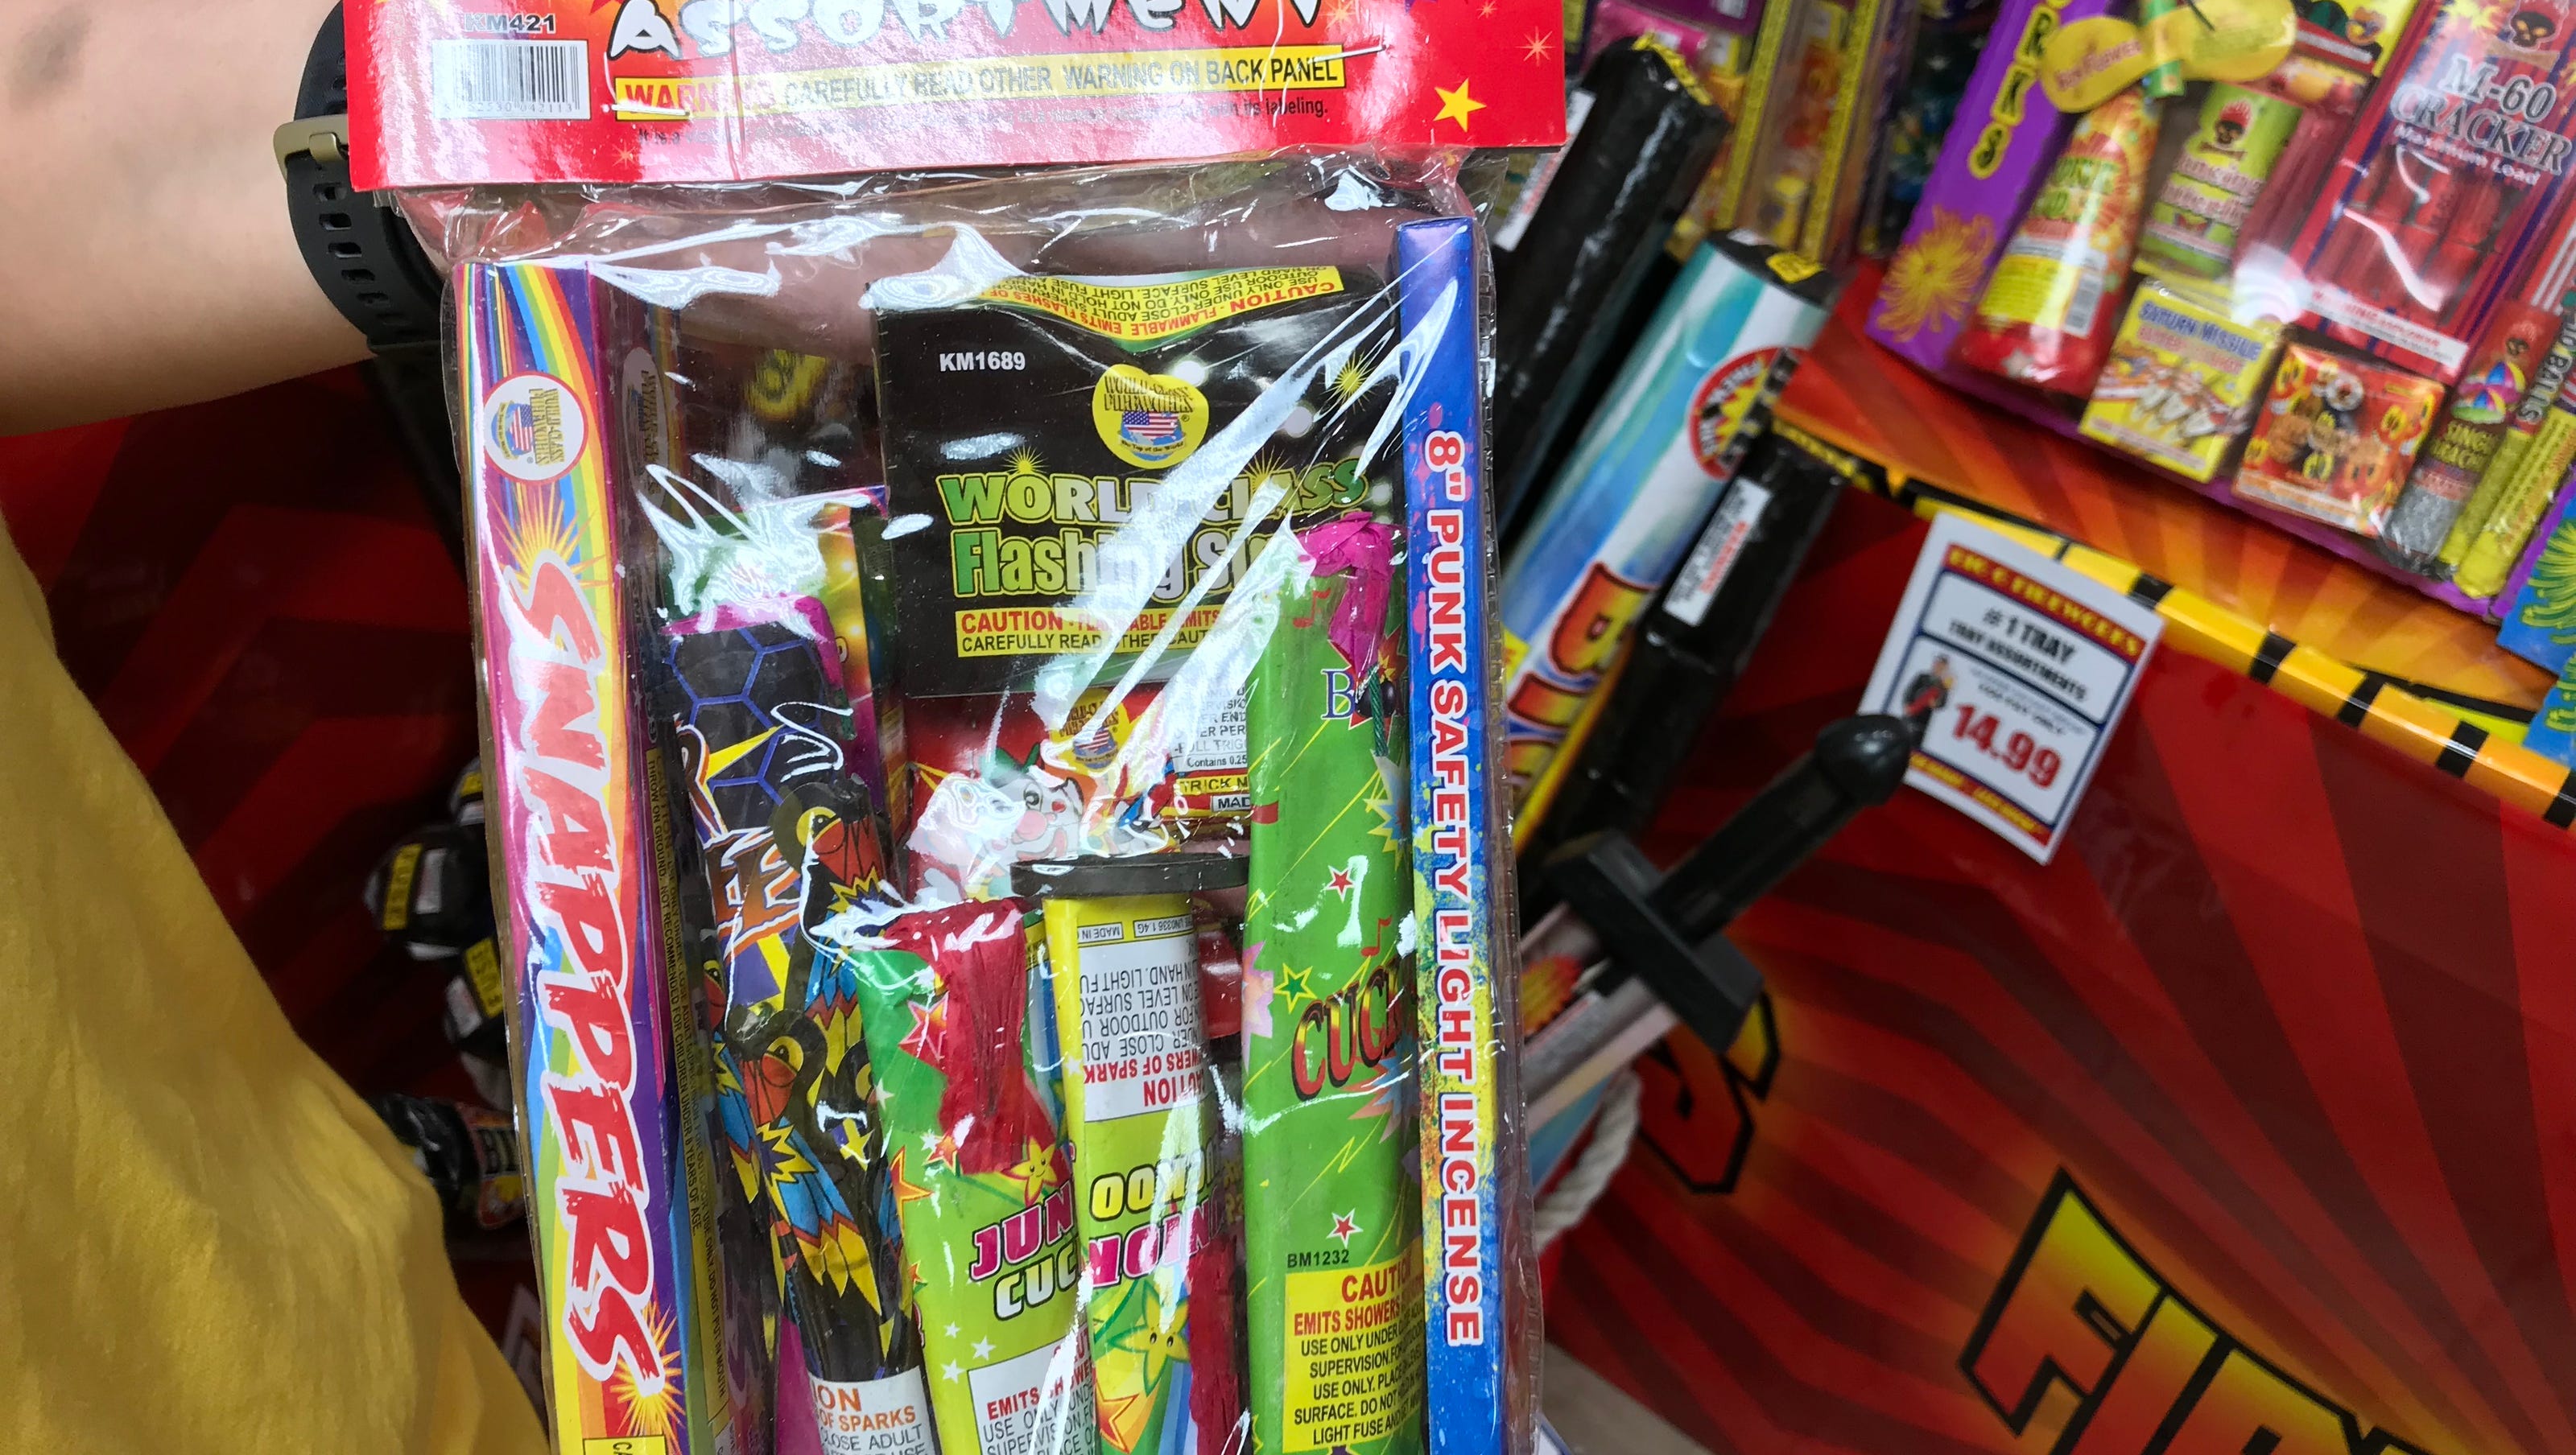 Best fireworks to buy for July 4th best sellers, kidfriendly options